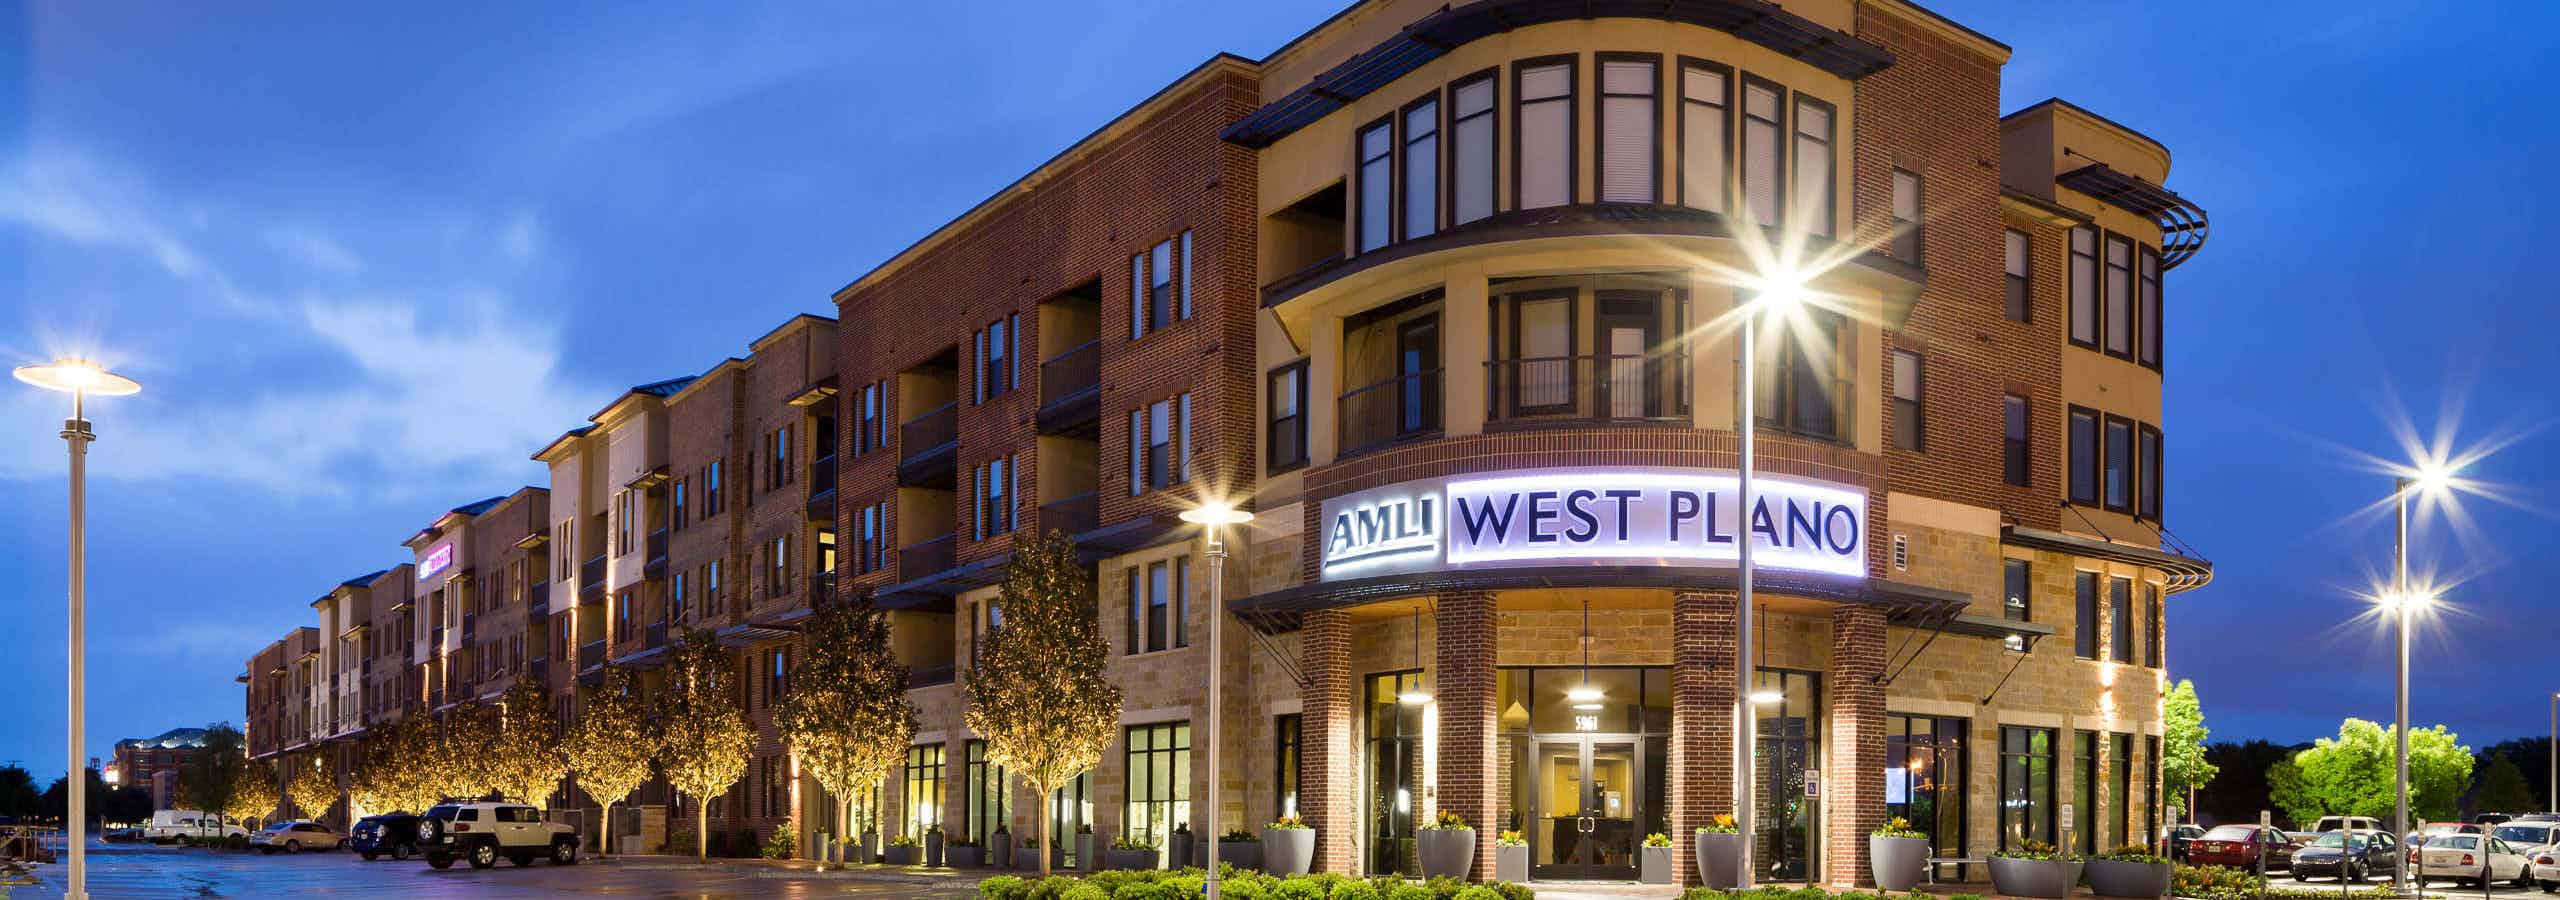 West Plano Apartments for Rent in North Dallas